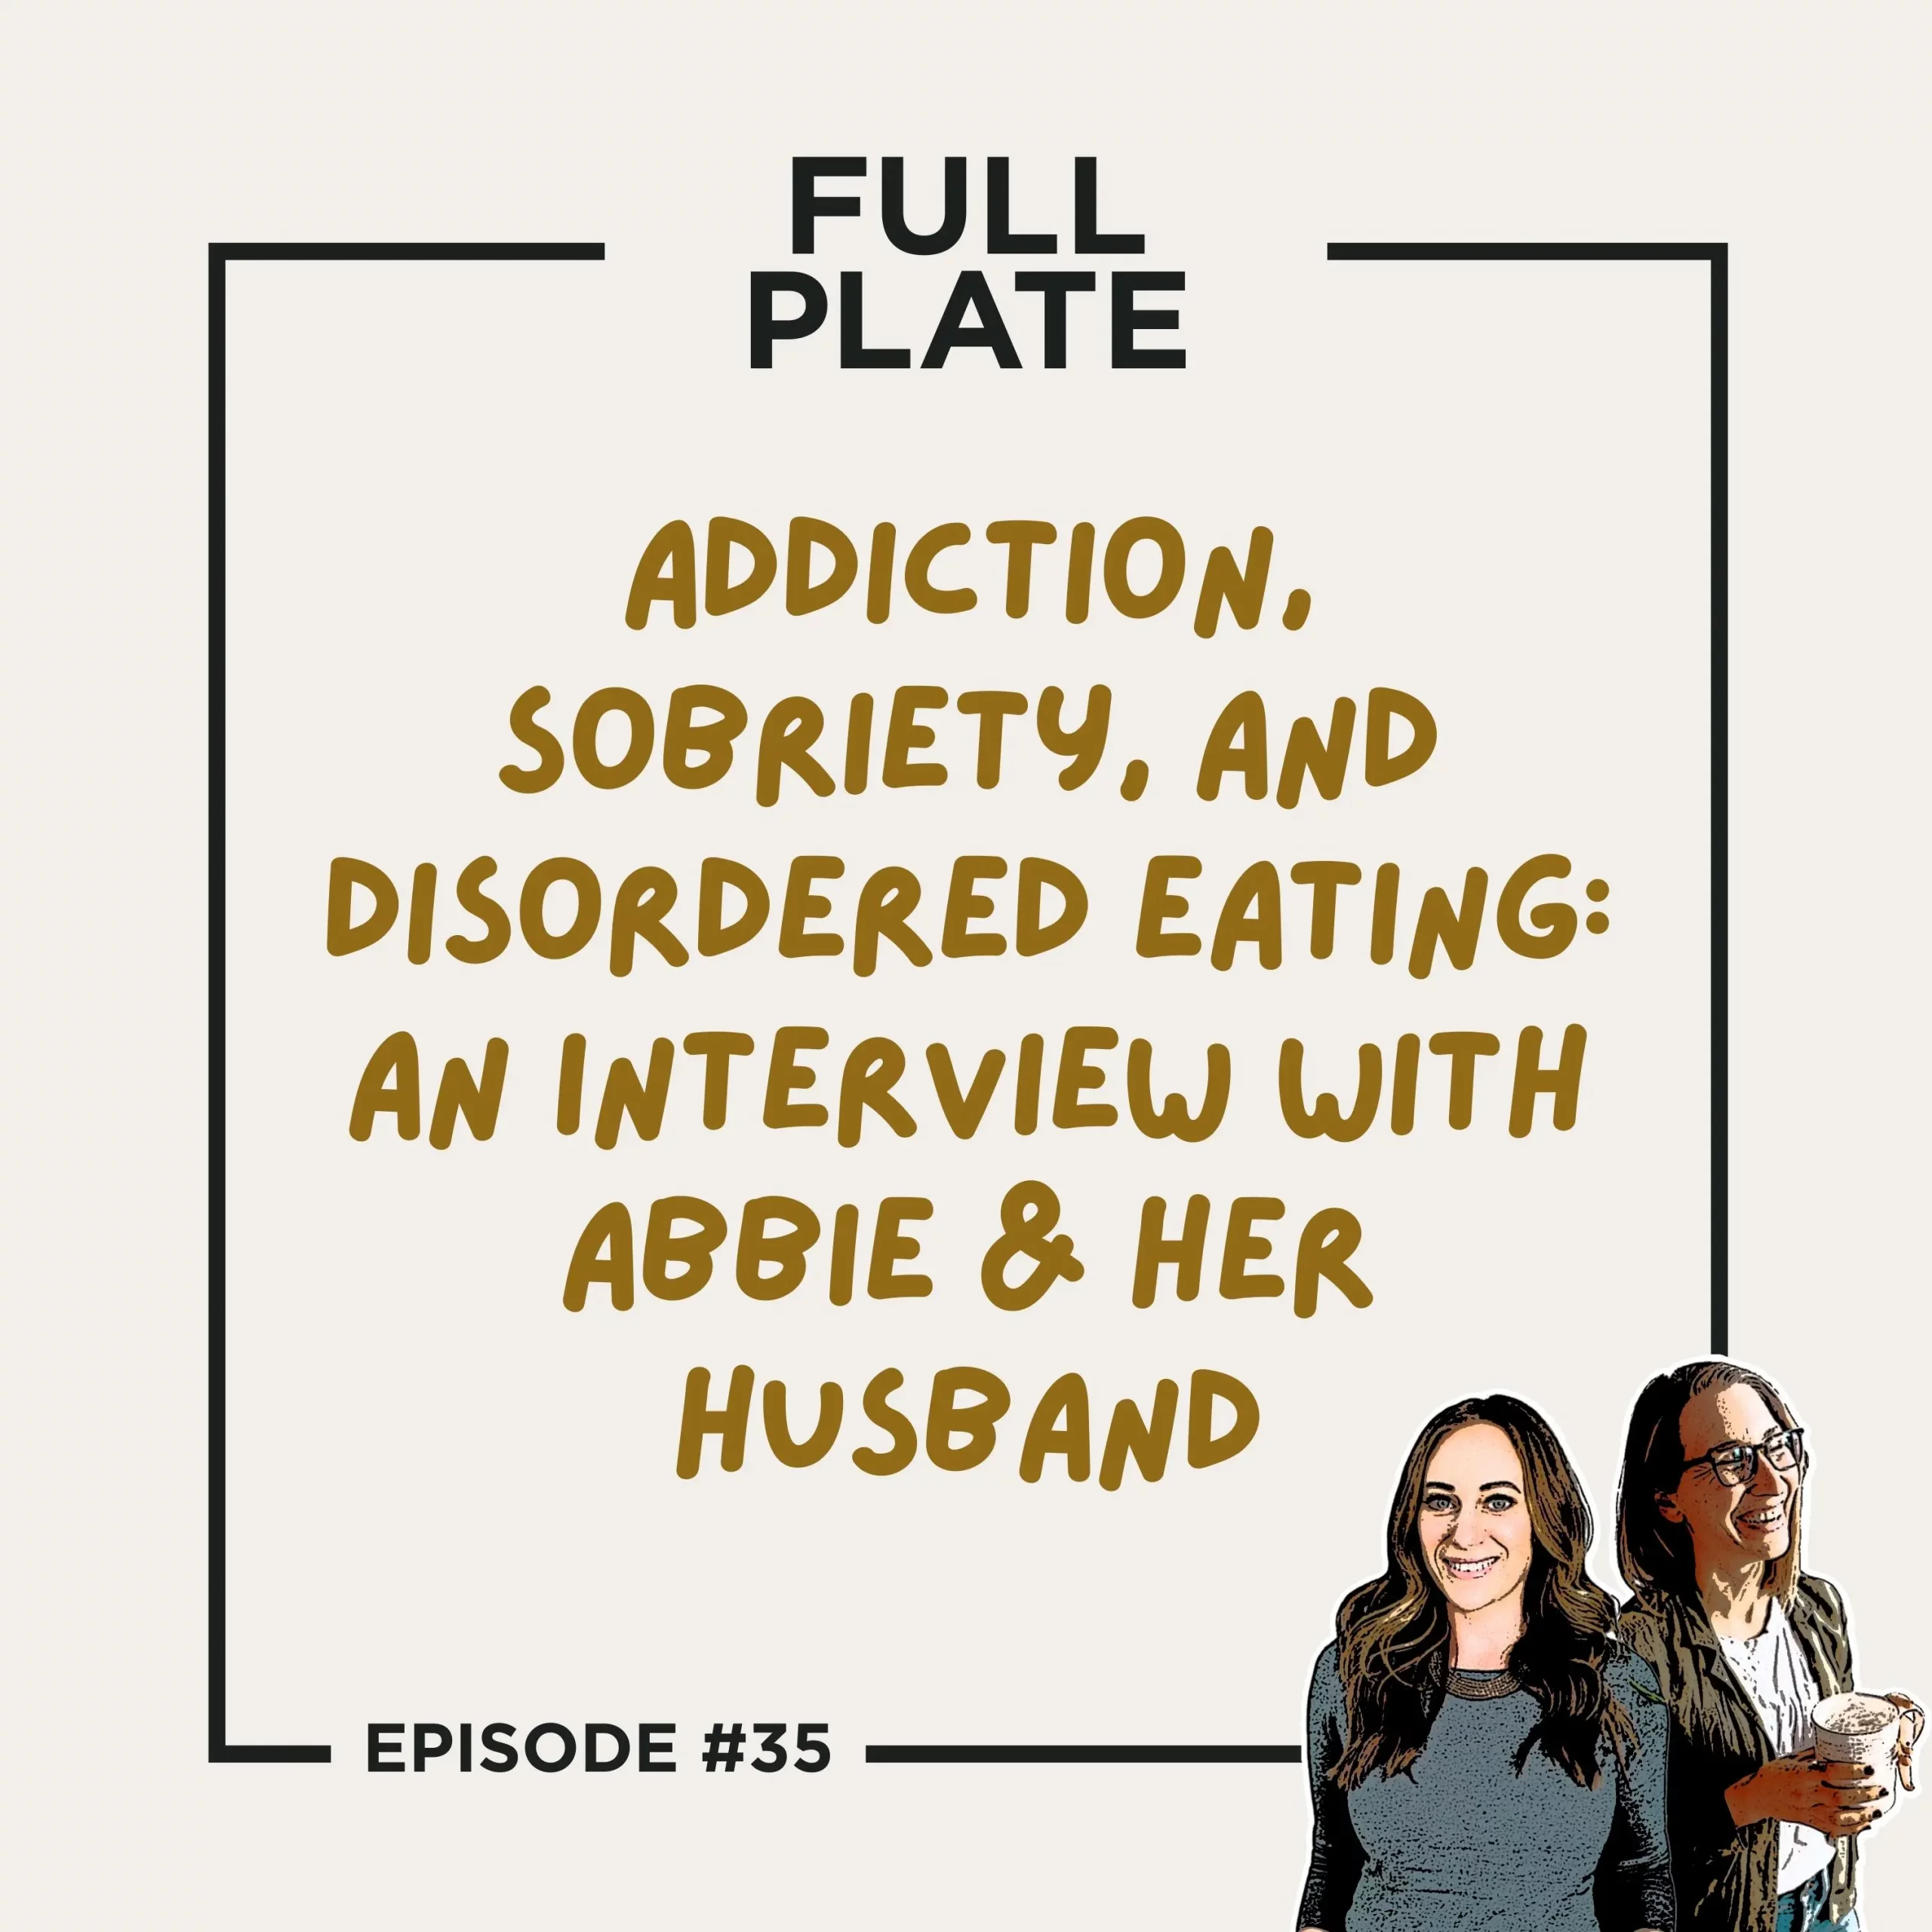 Full Plate Podcast | Ditch diet culture, respect your body, and set boundaries | Episode 35: Addiction, Sobriety, and Disordered Eating: An Interview with Abbie & Her Husband